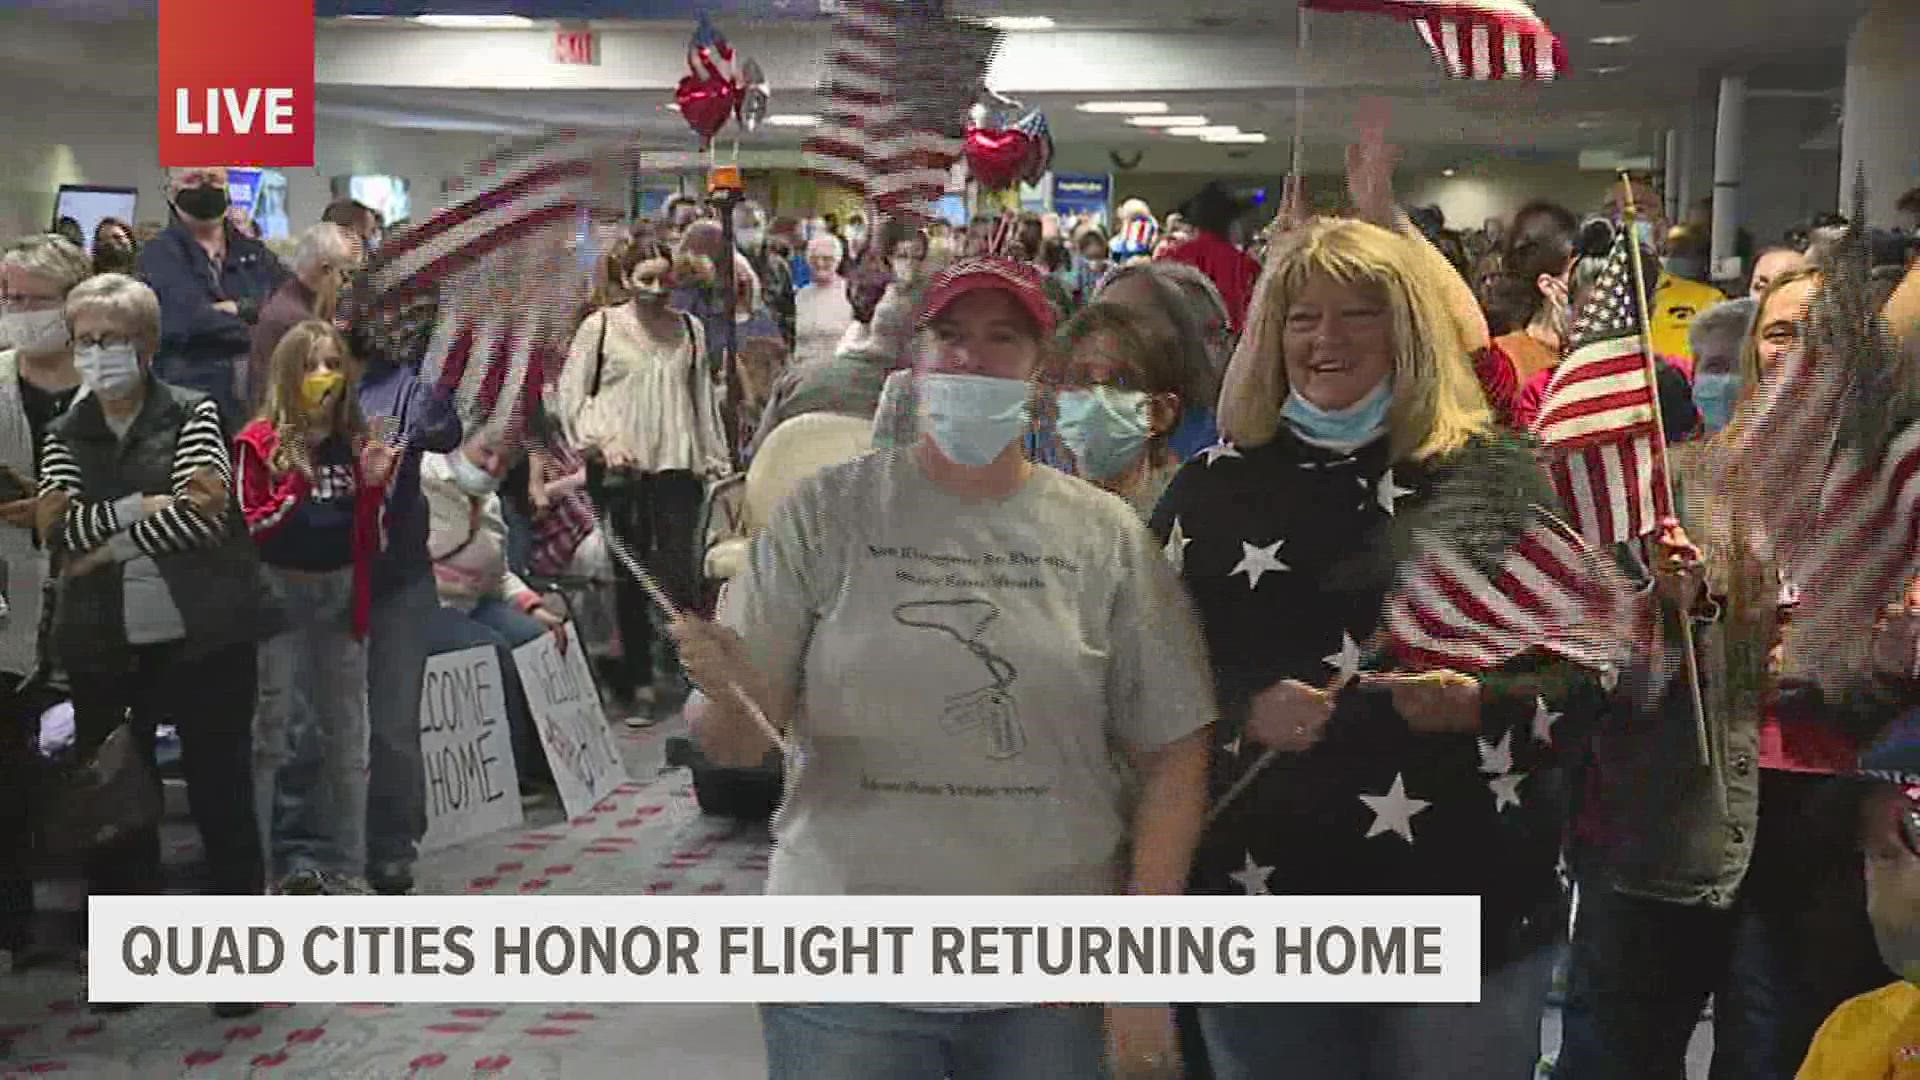 More than 90 veterans participated in the first honor flight of 2022. Tuesday's flight was designated as the "Galva" area honor flight.